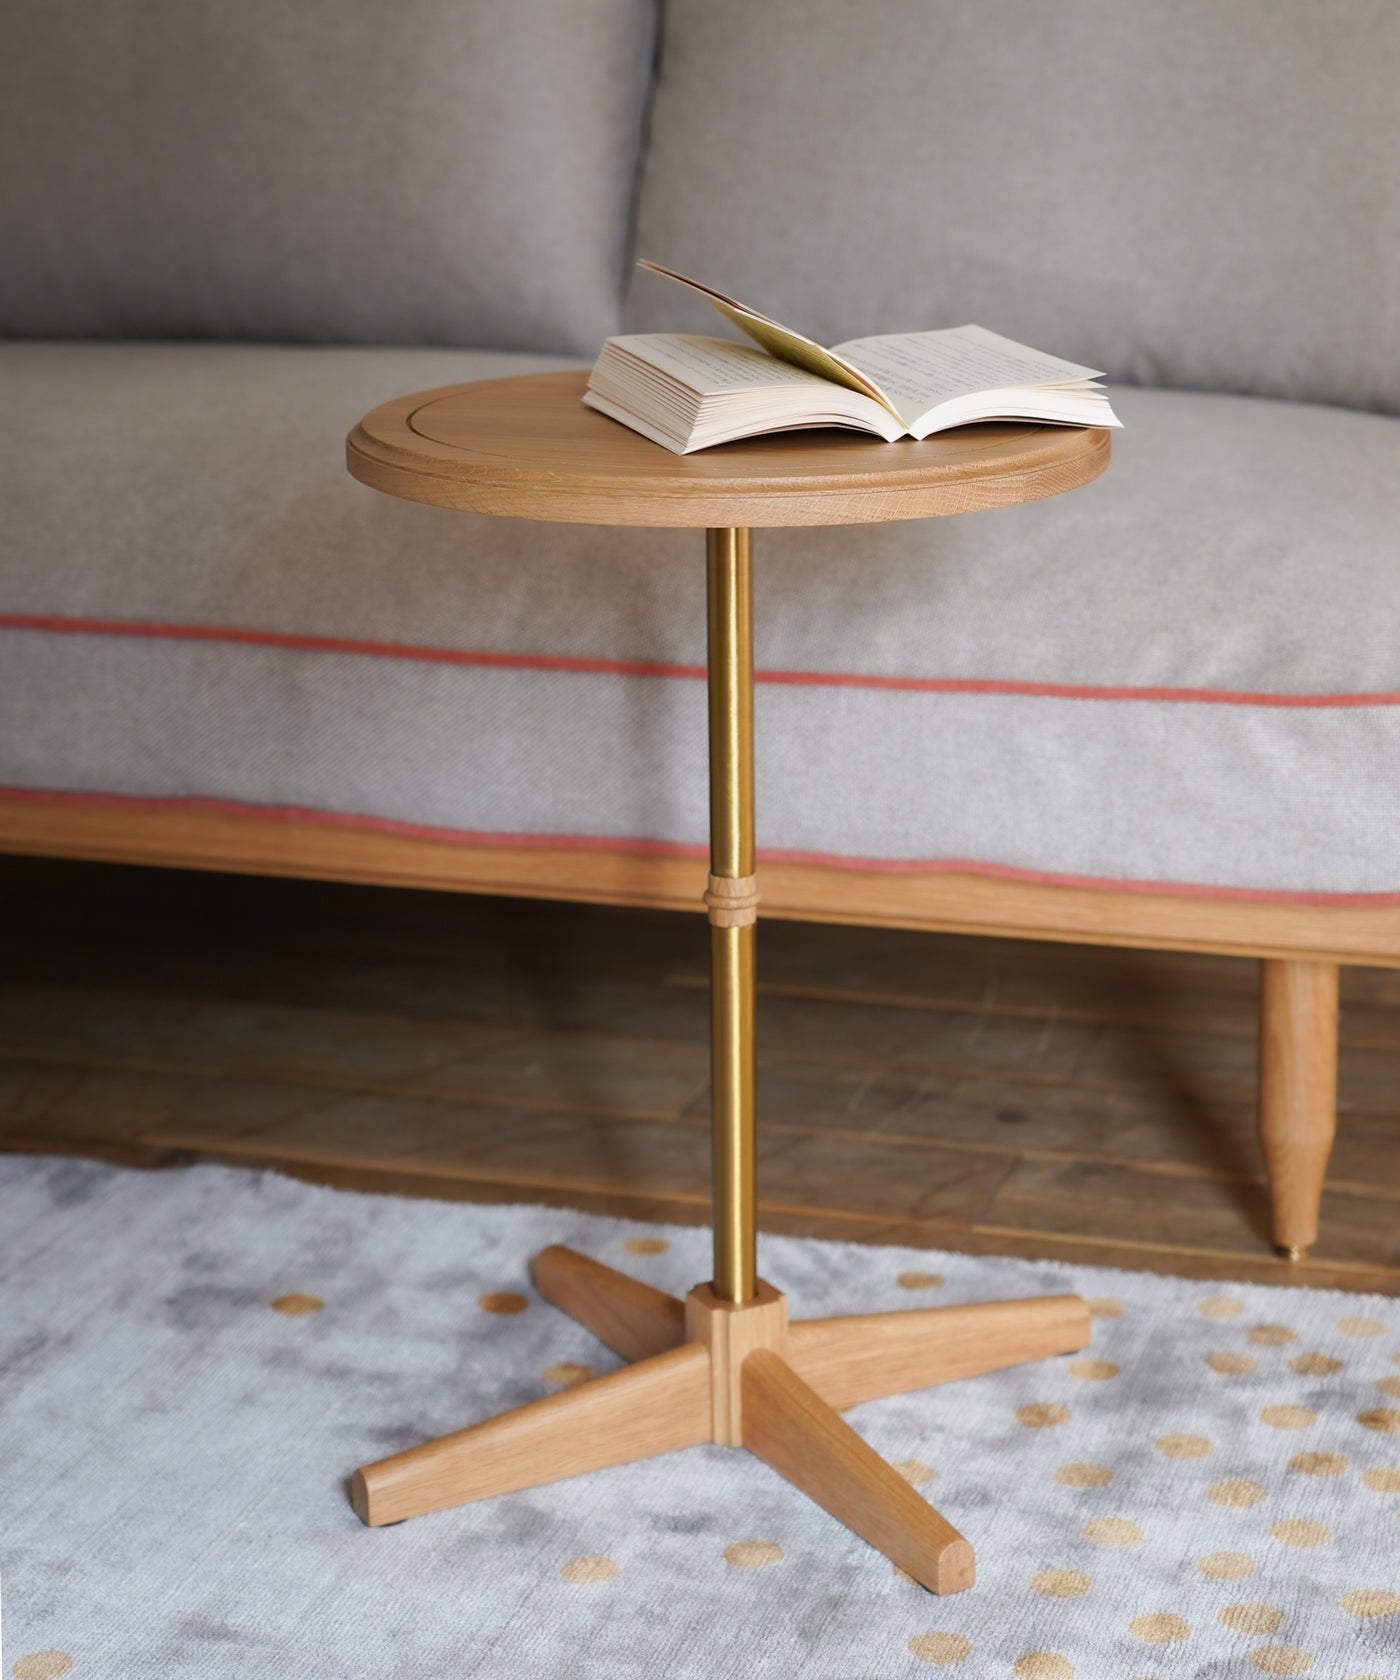 LIEN ROUND SIDE TABLE